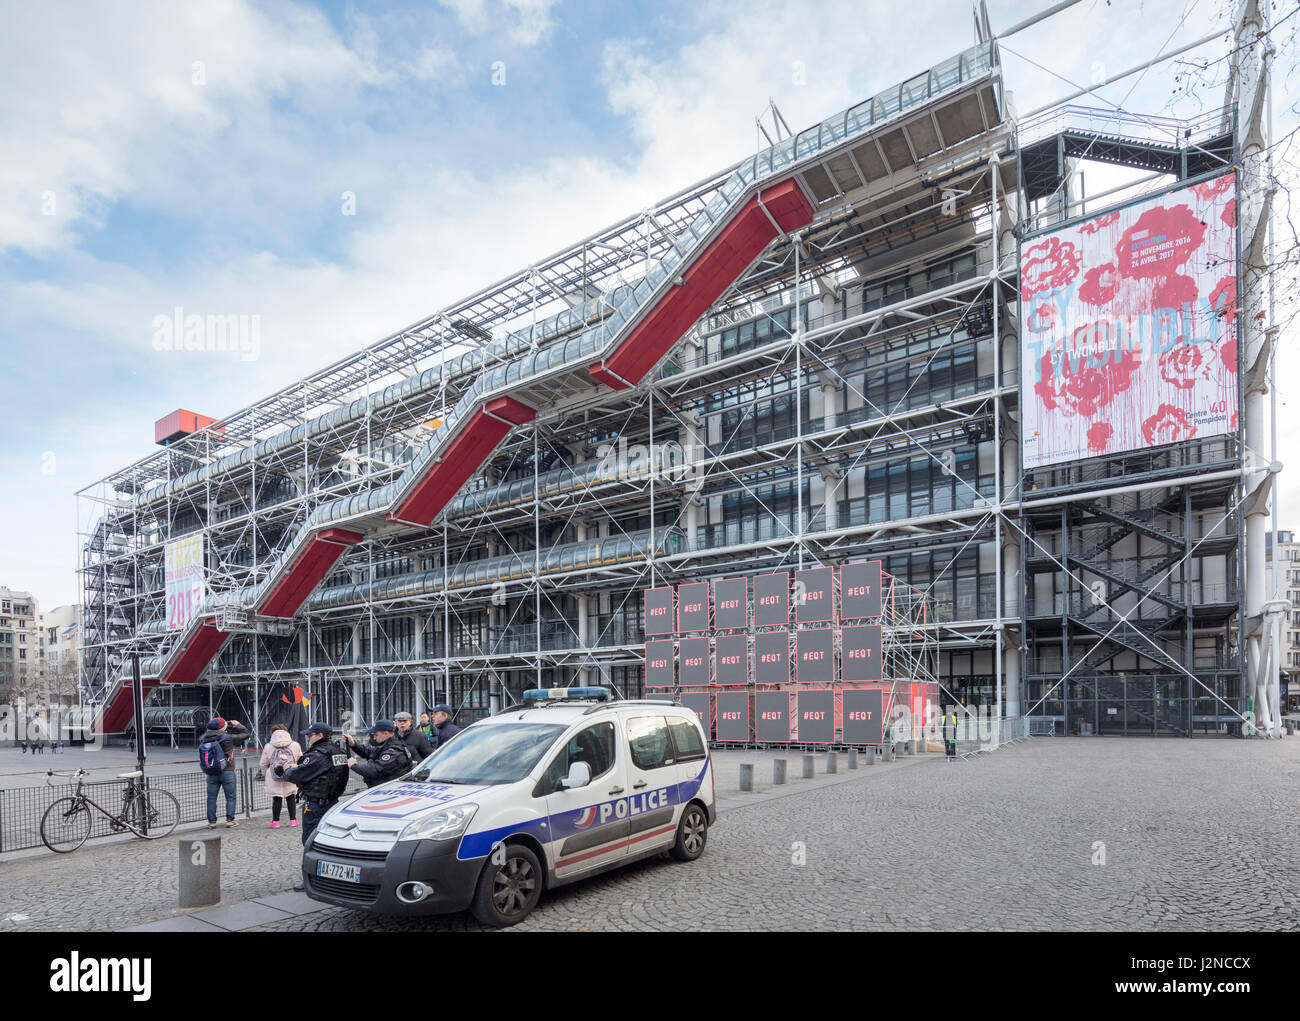 police car in front of the Pompidou Center, Paris, France Stock Photo